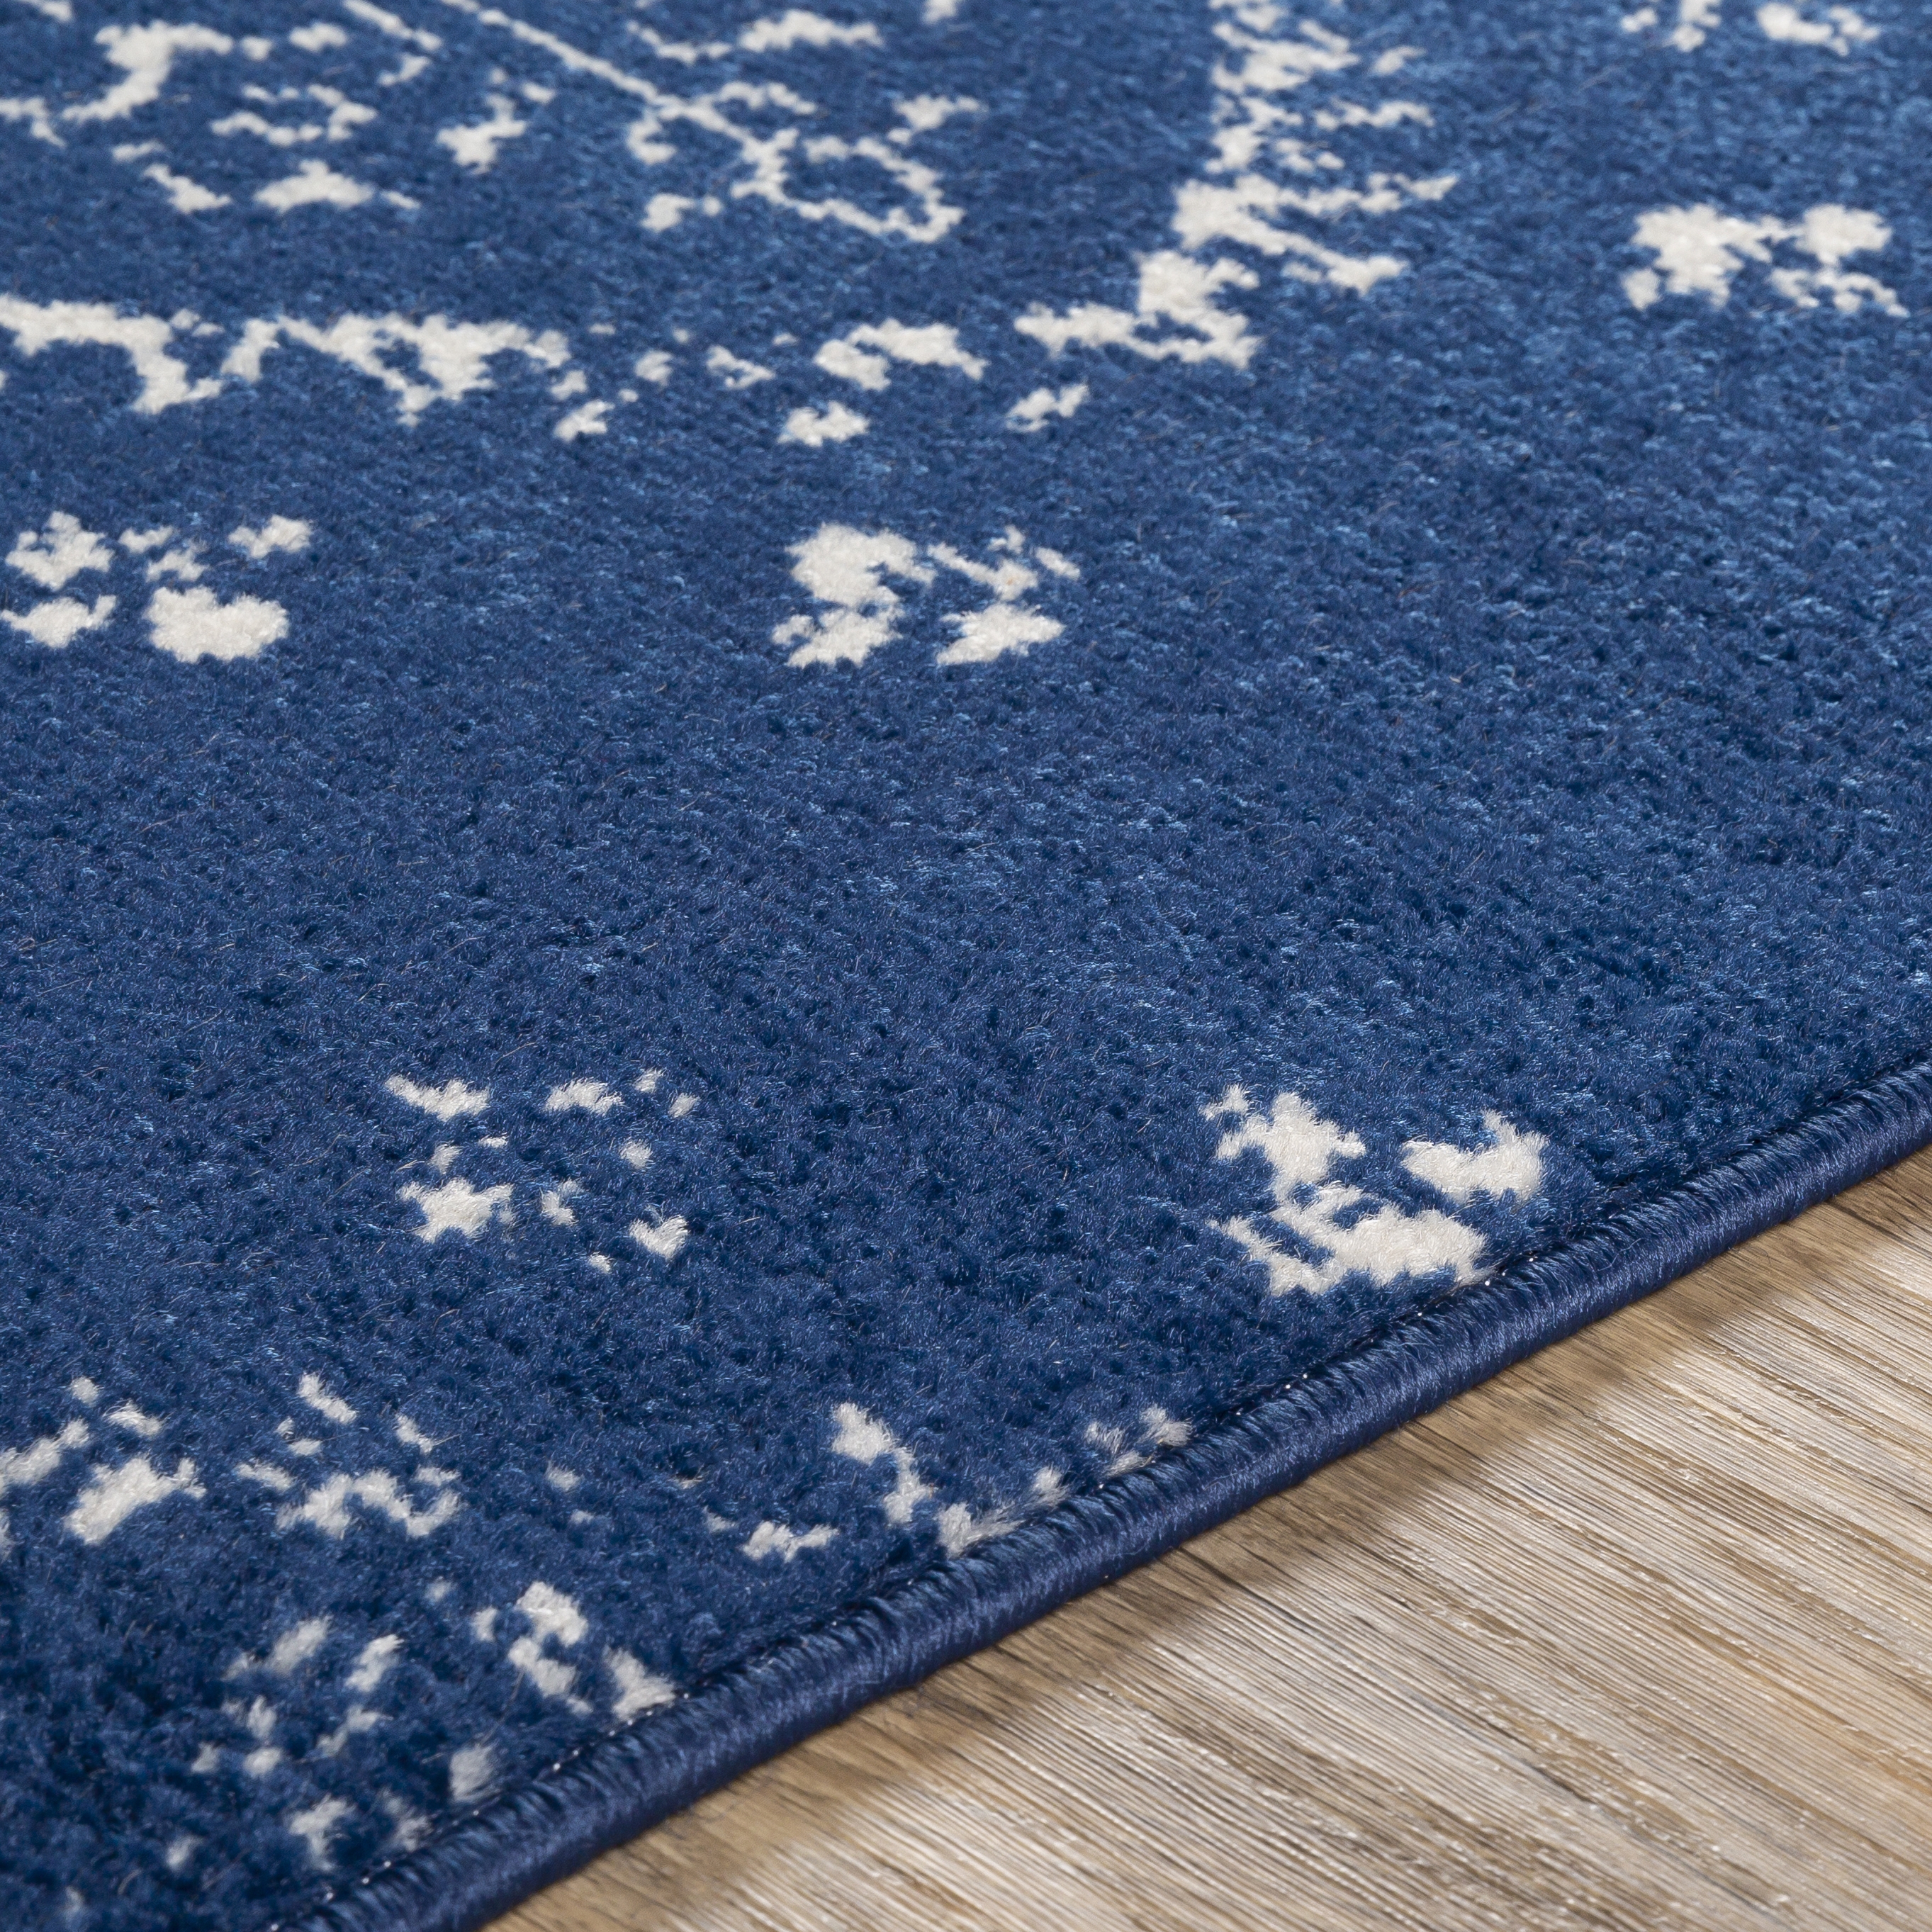 Chester Rug, 5'3" x 7'3" - Image 3